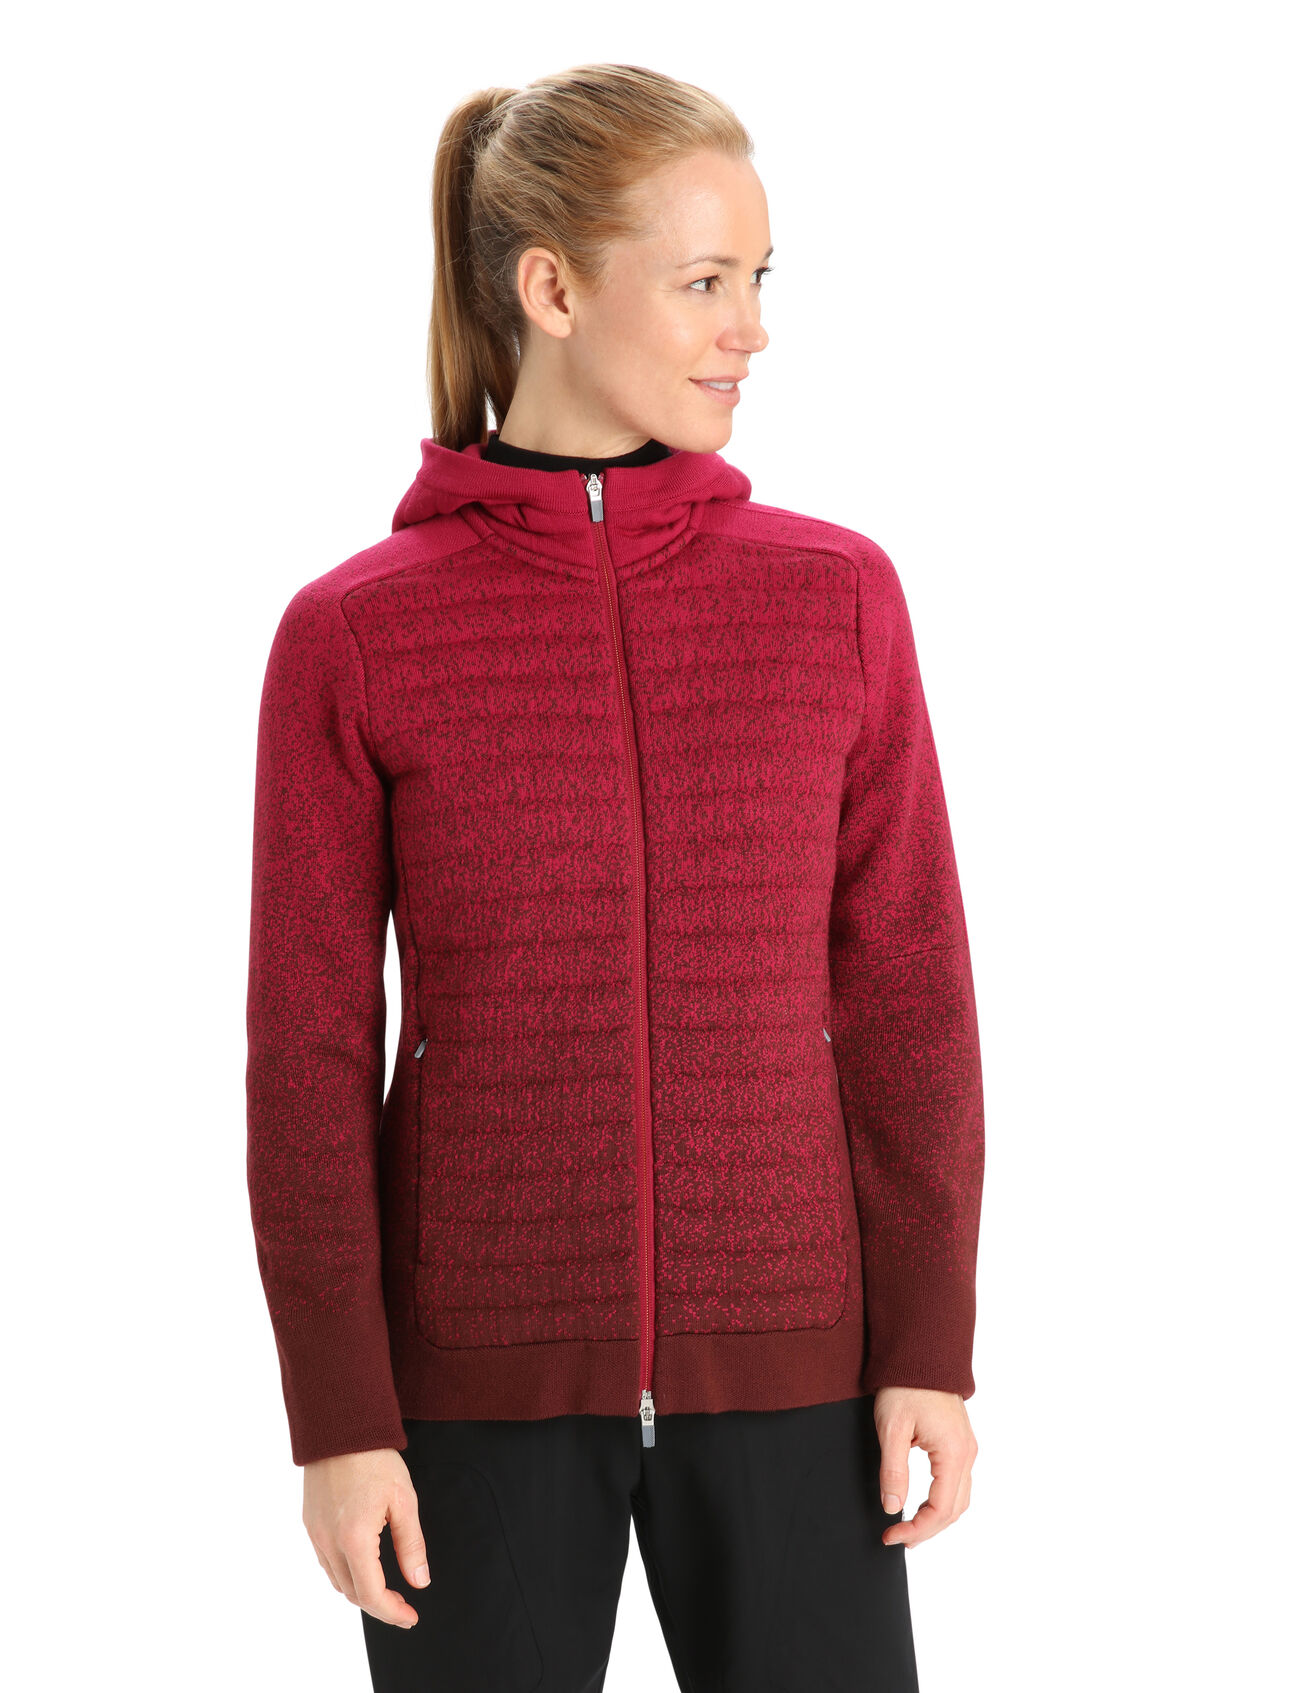 Womens ZoneKnit™ Merino Insulated Long Sleeve Zip Hoodie Into the Deep Highly breathable with targeted ventilation areas and a movement-focused fit, the ZoneKnit™ Insulated Long Sleeve Zip Hoodie Into the Deep is a body-mapped hoodie primed for adventure.